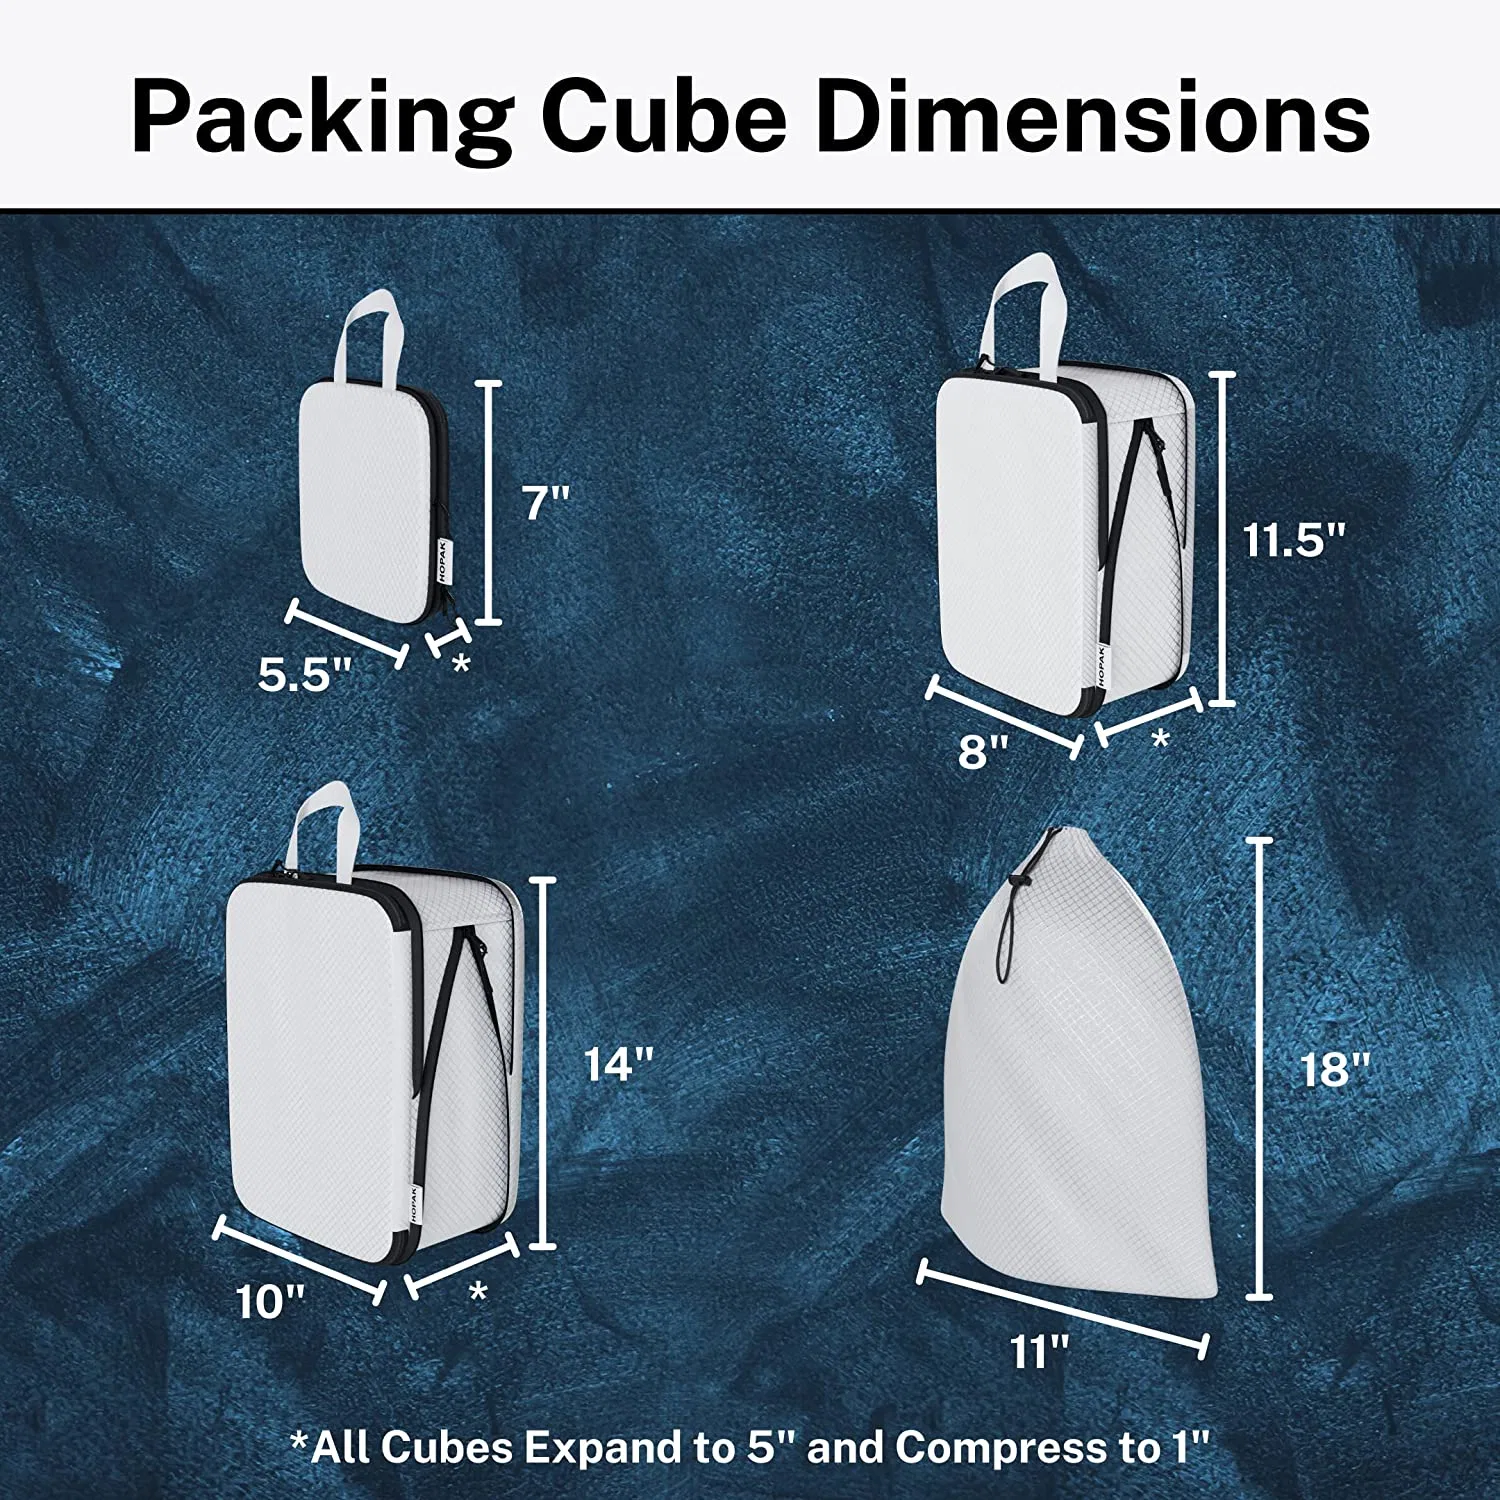 3PCS Luggage Sets with Drawstring Bag - Double Zipper Compression System Packing Cubes for Travel - Storage Cubes